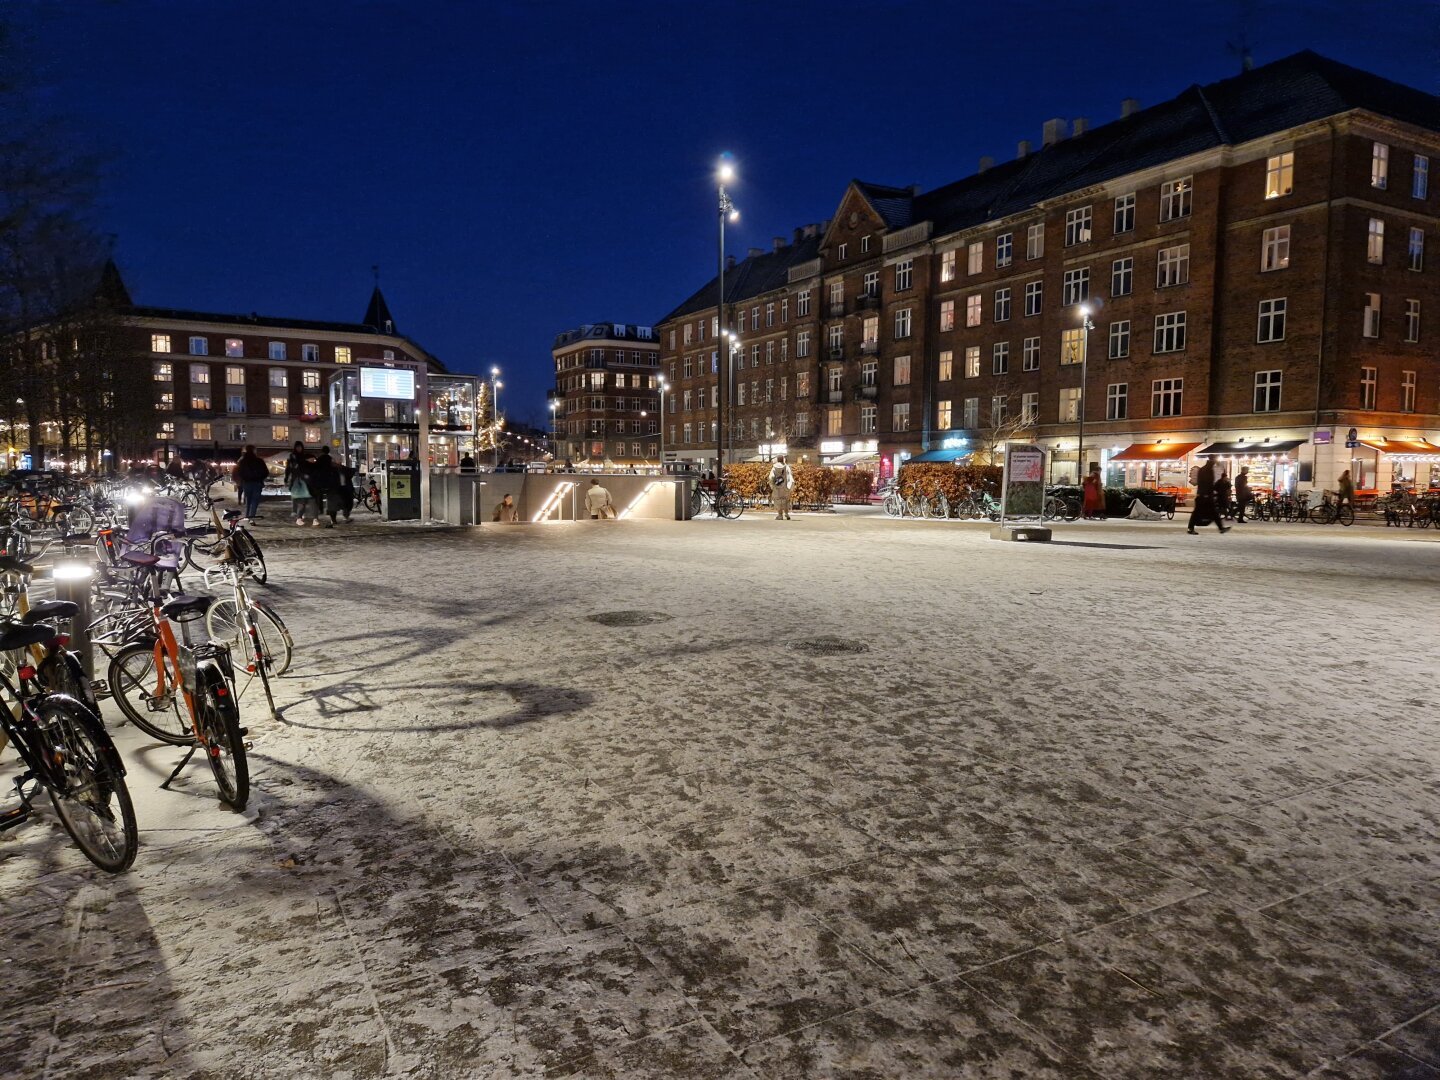 A square with a Metro exit, it is dark but with lots of street light. A thin layer of snow cover the ground.